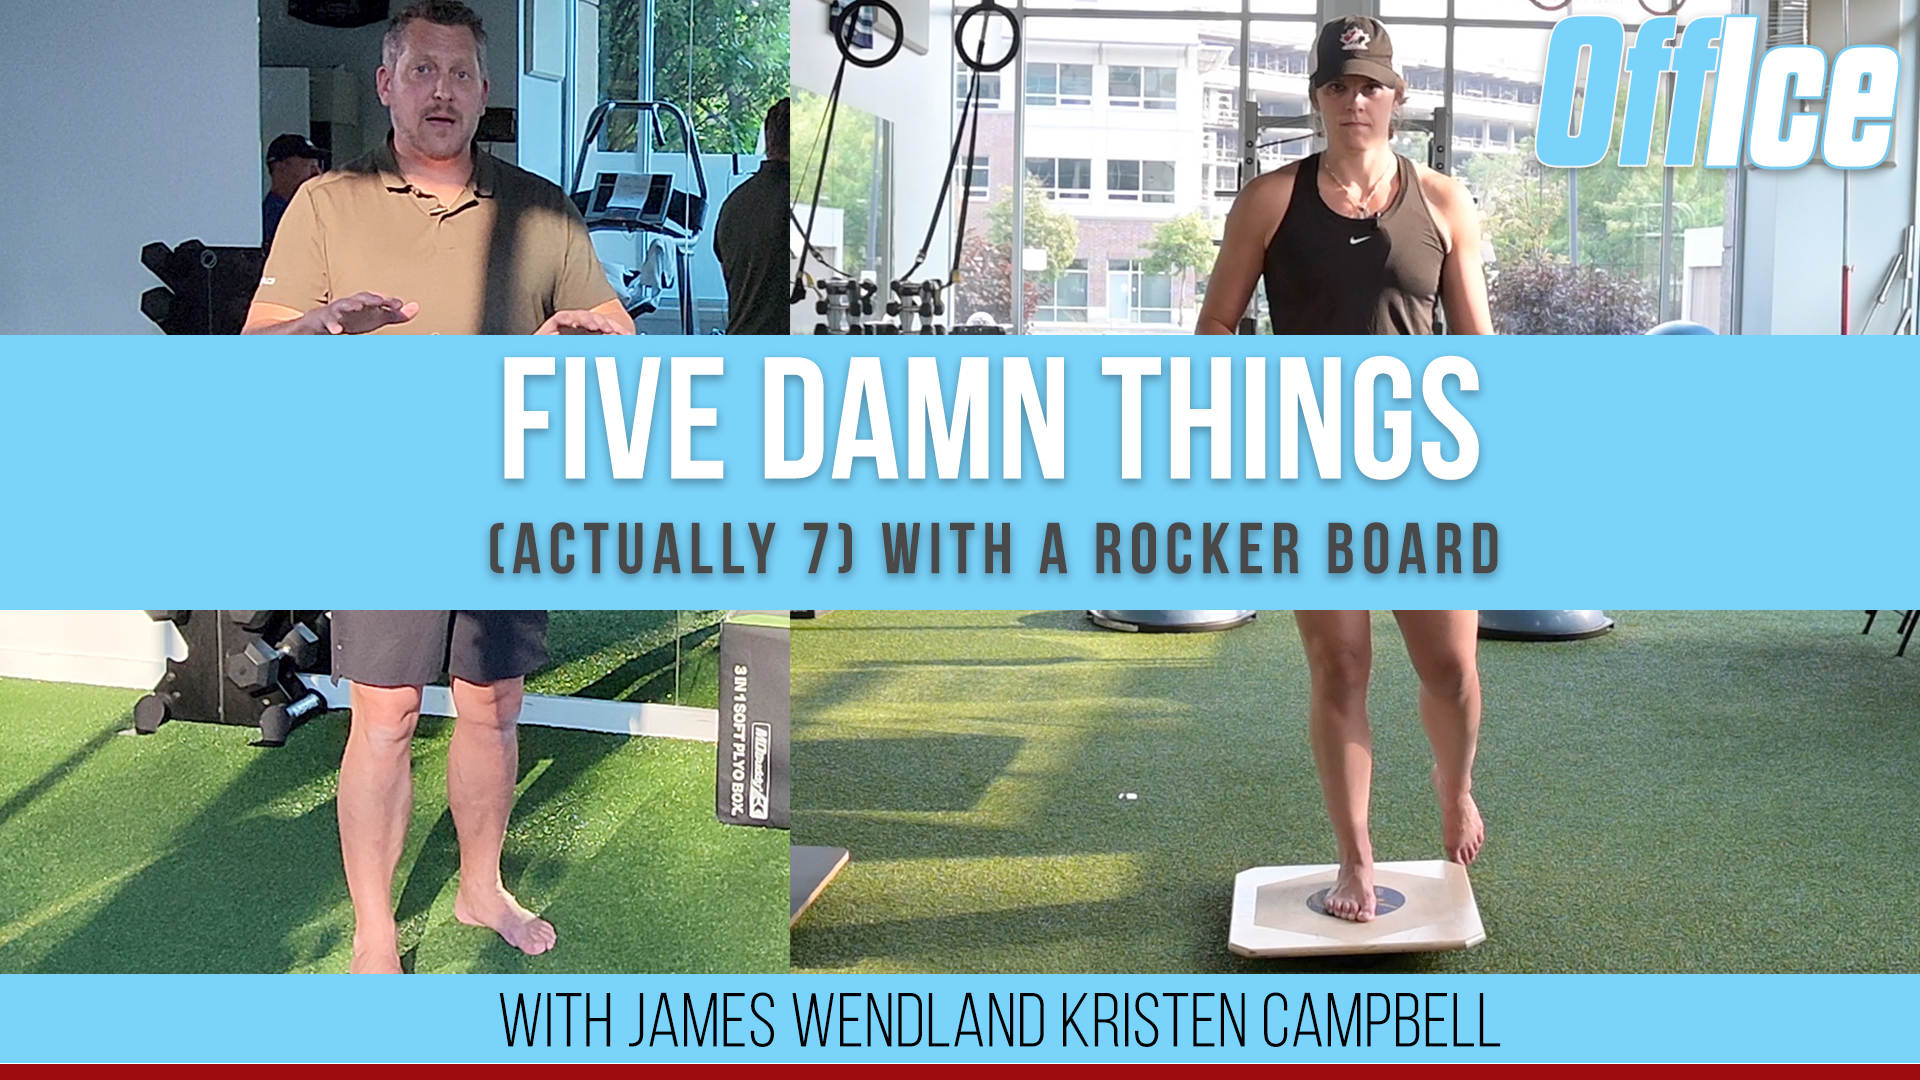 5 (actually 7) Damn Things with a Rocker Board